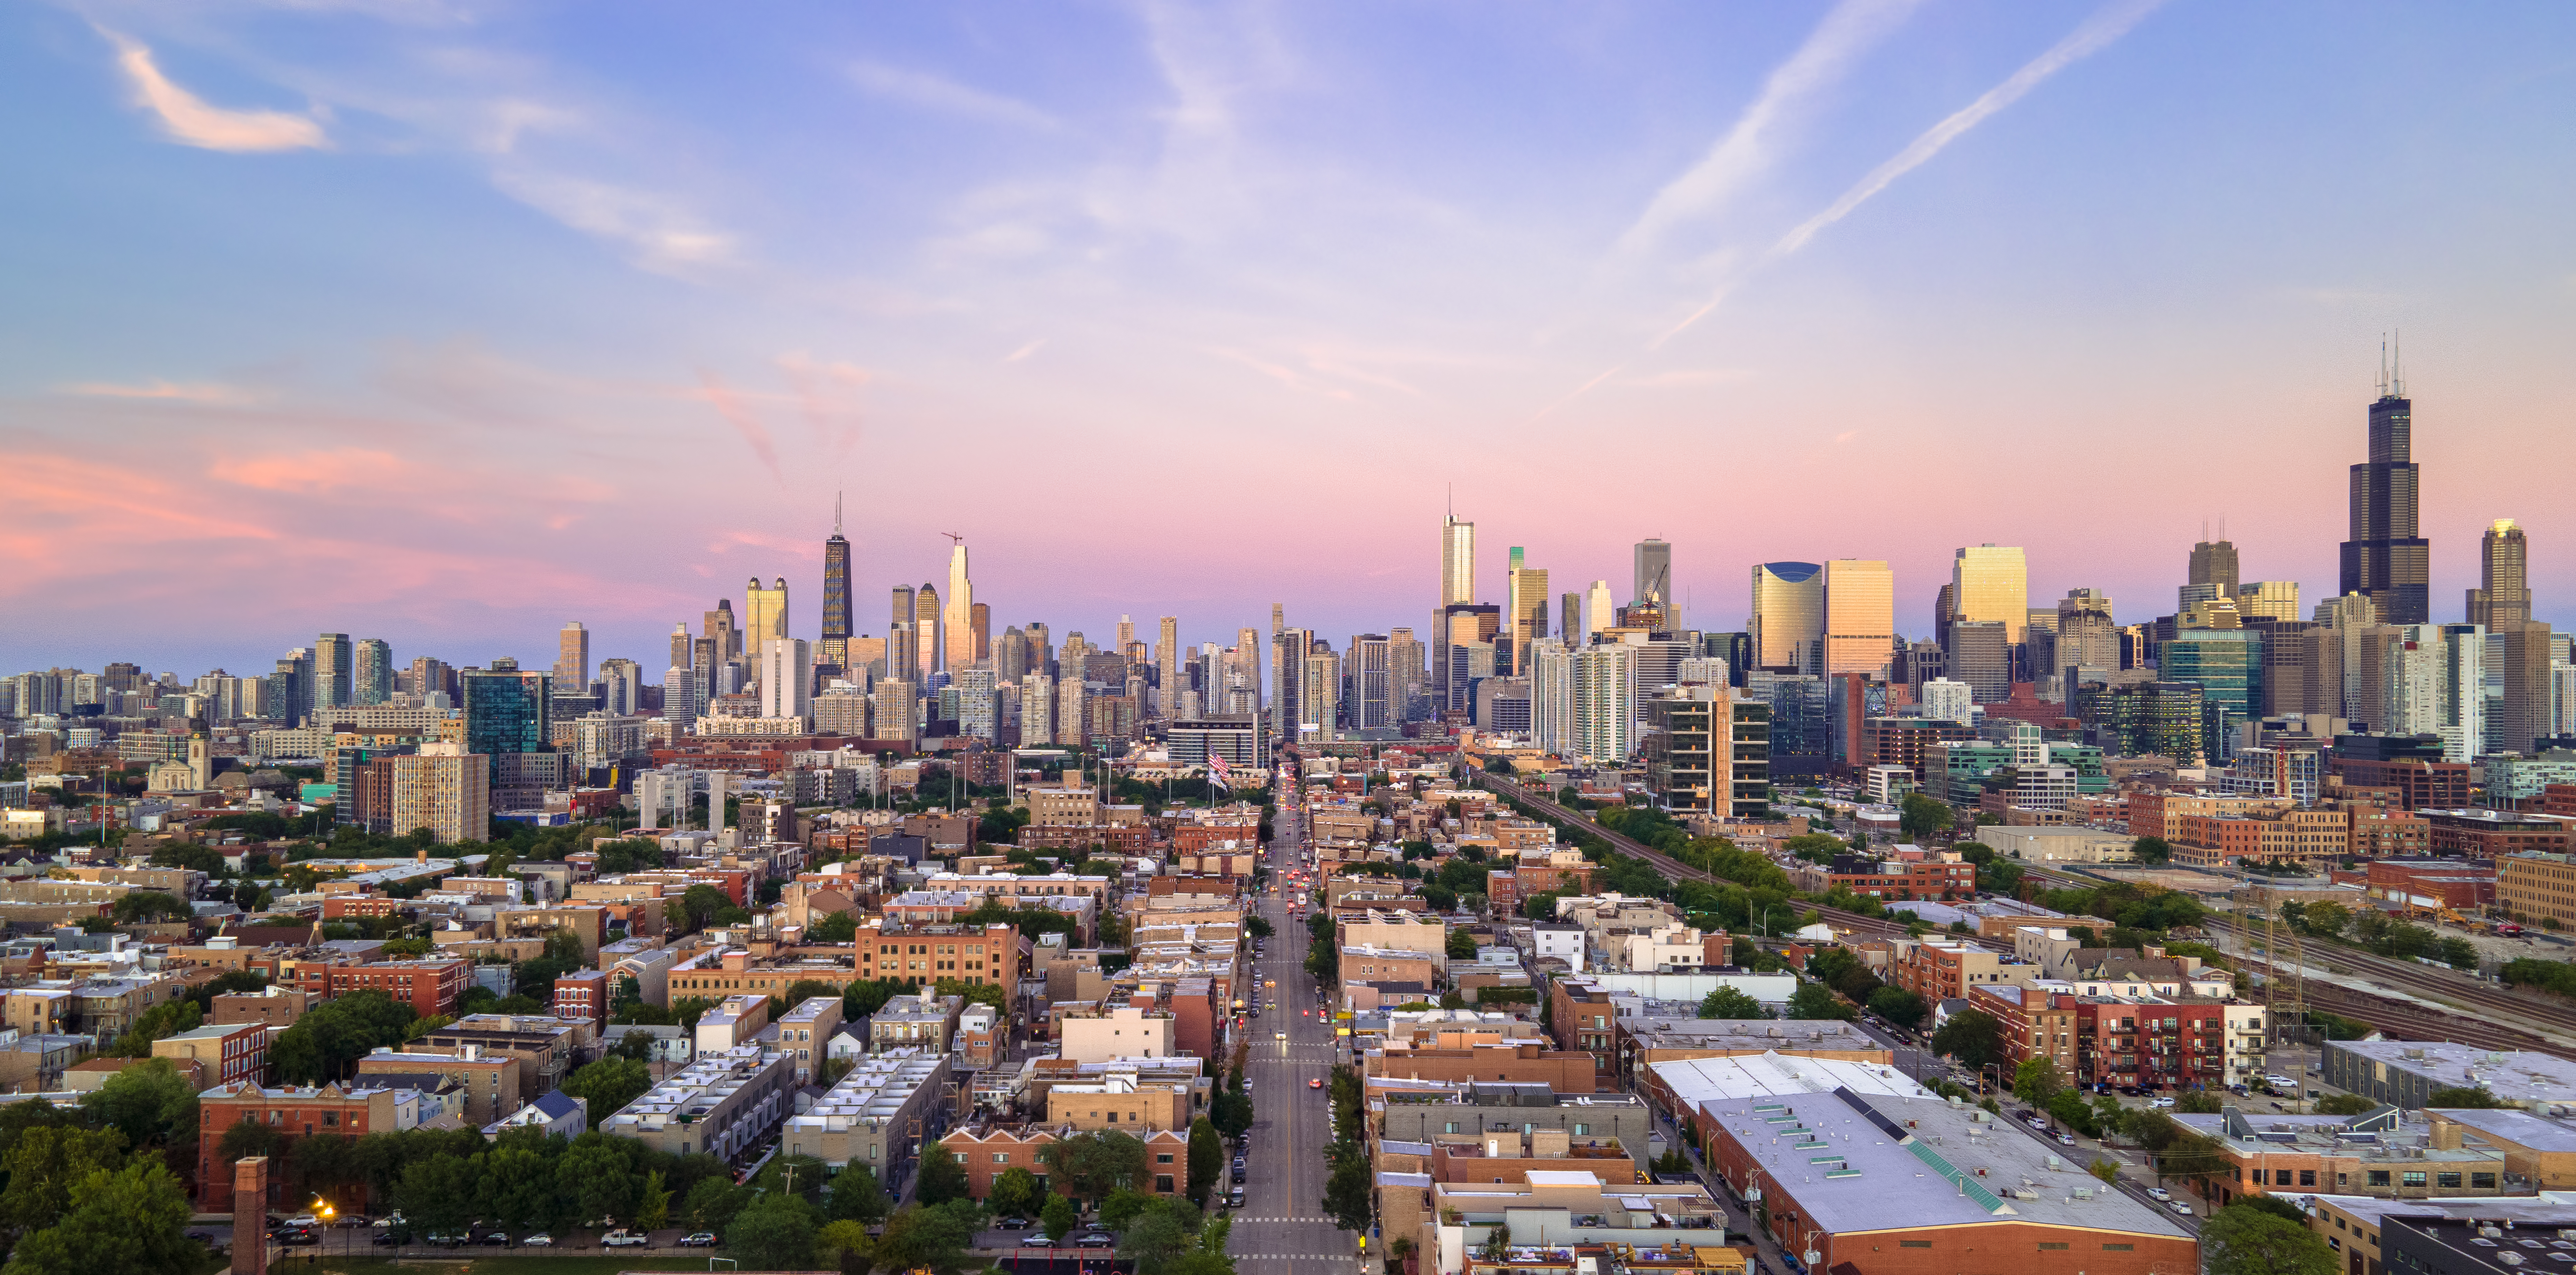 Chicago Drone Drone Photo Aerial City Skyline Sunset 7451x3687